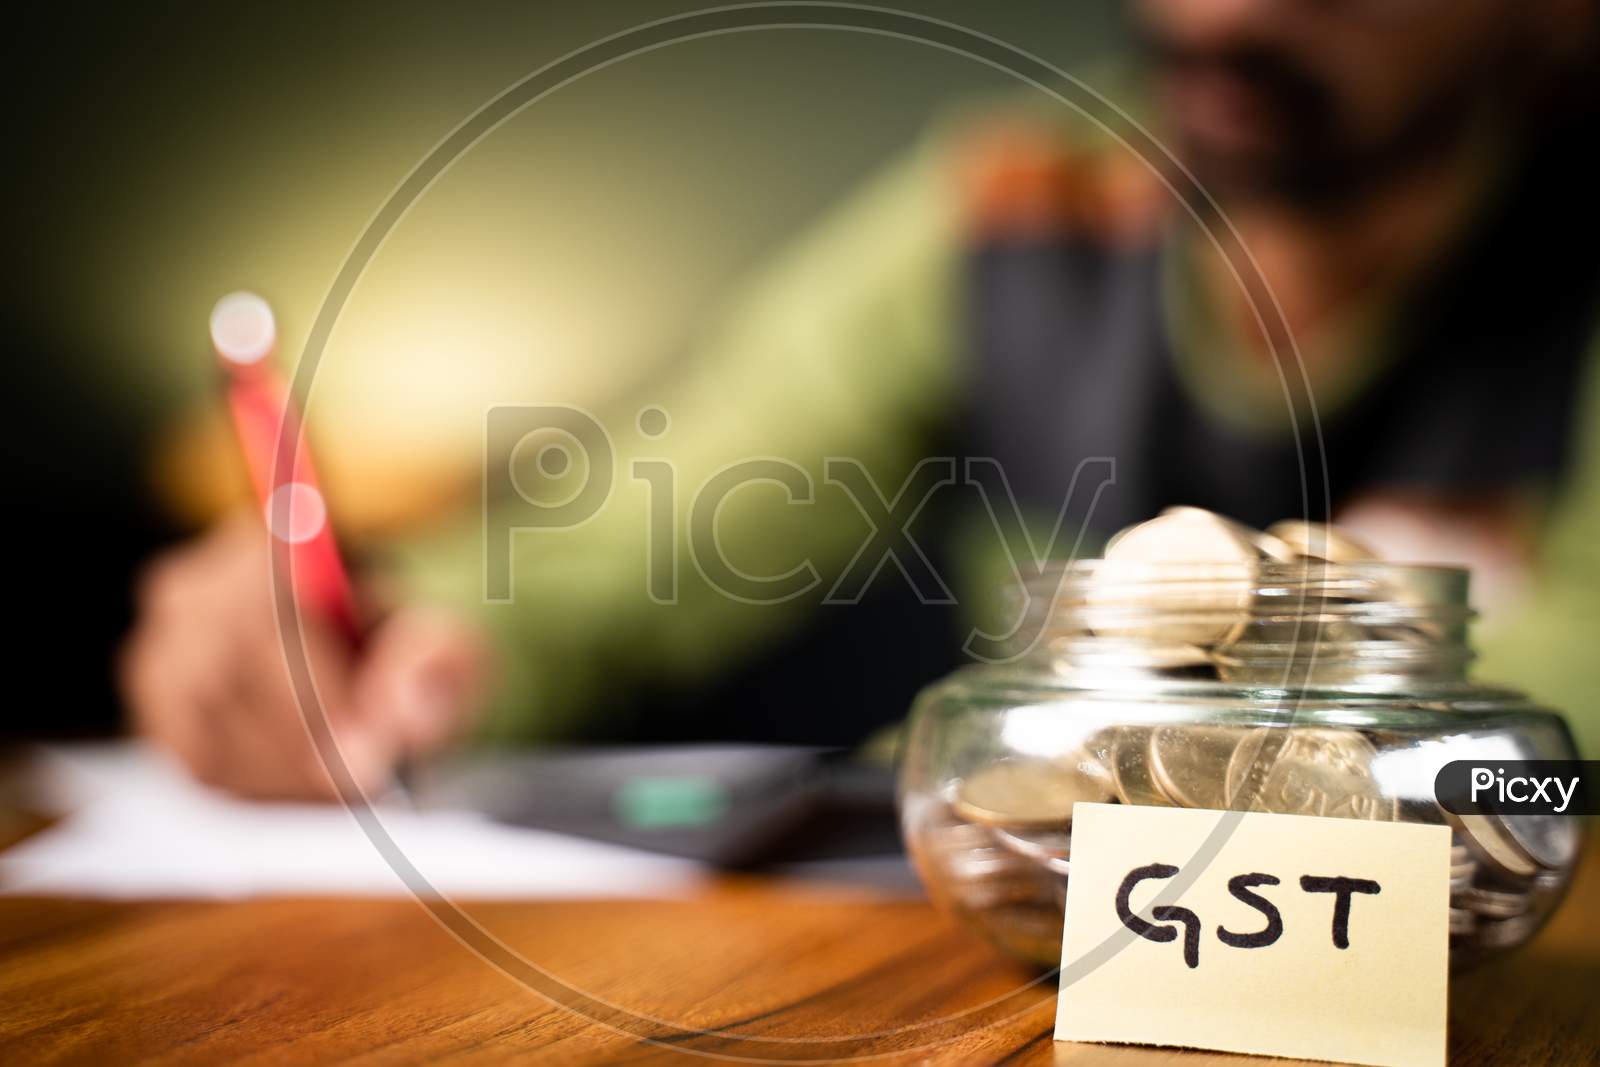 Selective Focus On Coins In Bottle And Gst Sticky Note, Man In Background Checking Spendings On Calculator - Concept Of Gst Tax Savings Calculation.